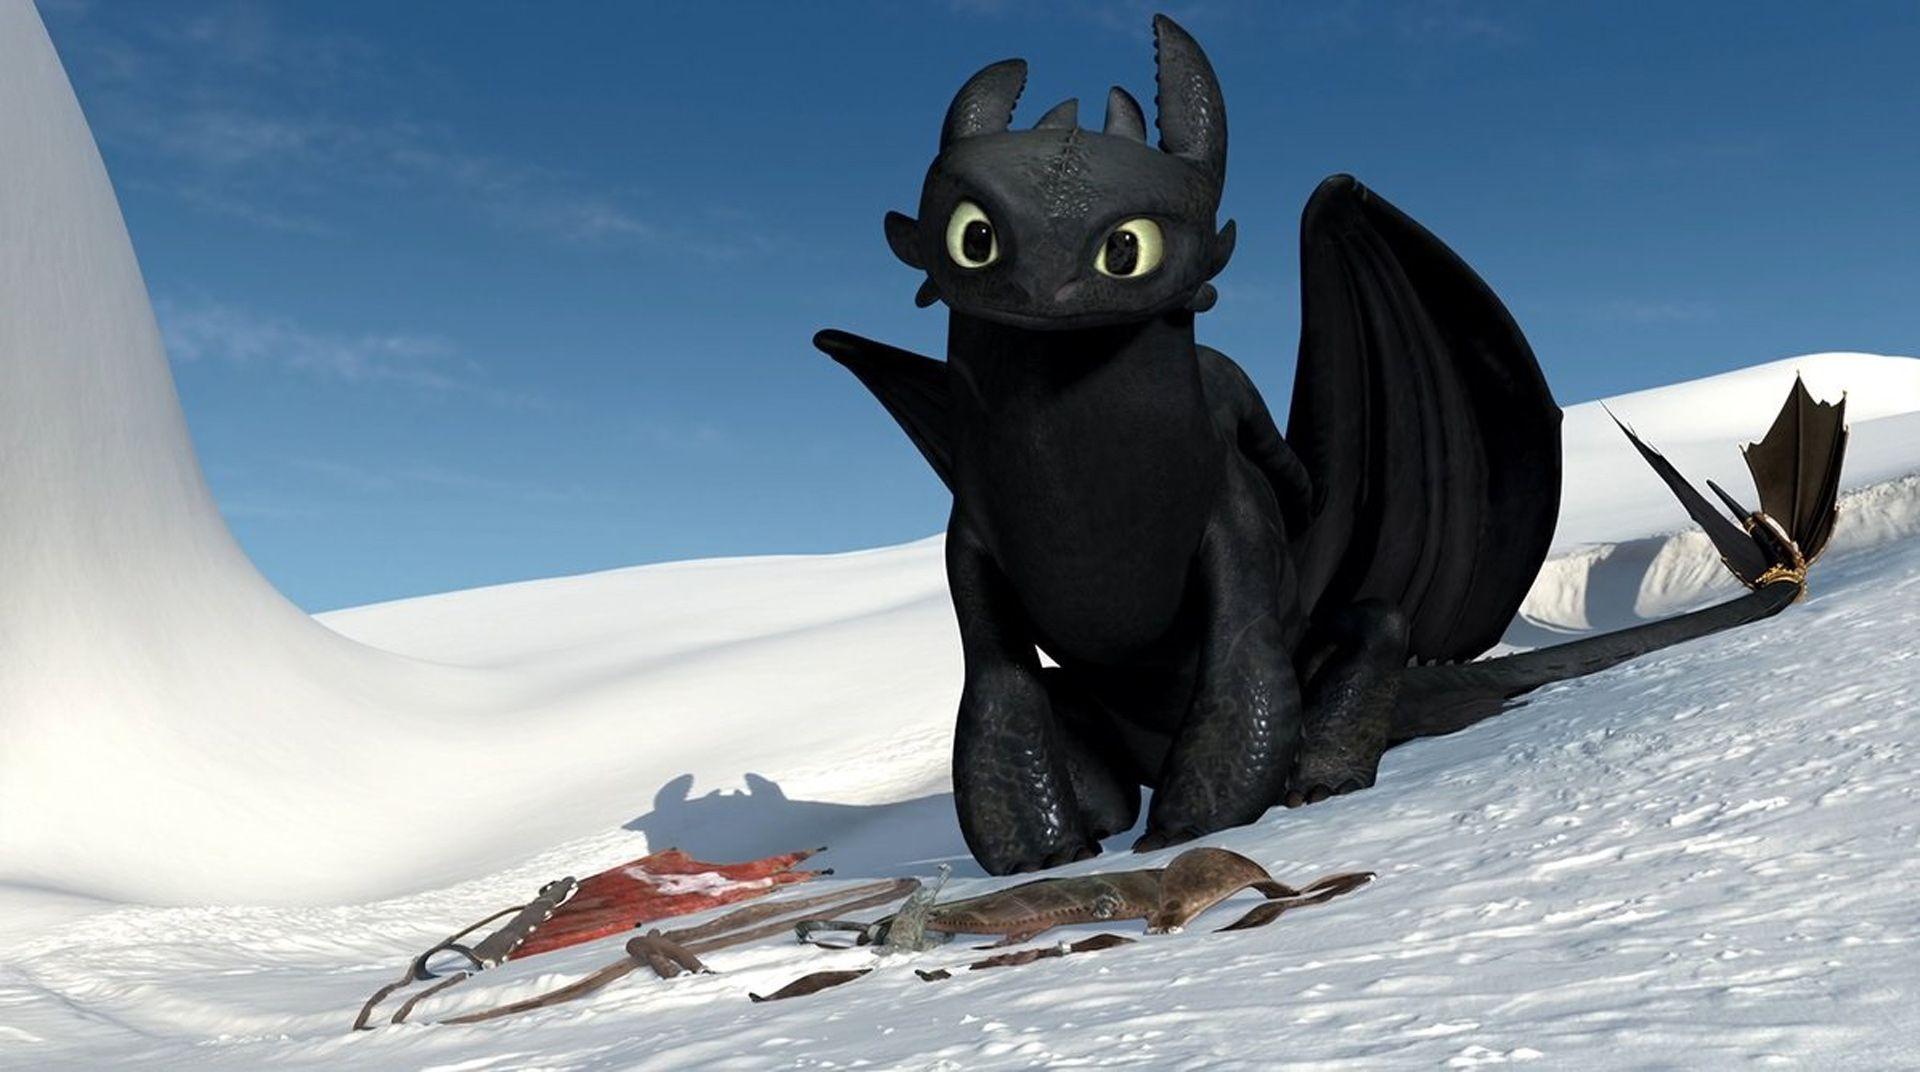 Toothless The Dragon Wallpapers - Wallpaper Cave